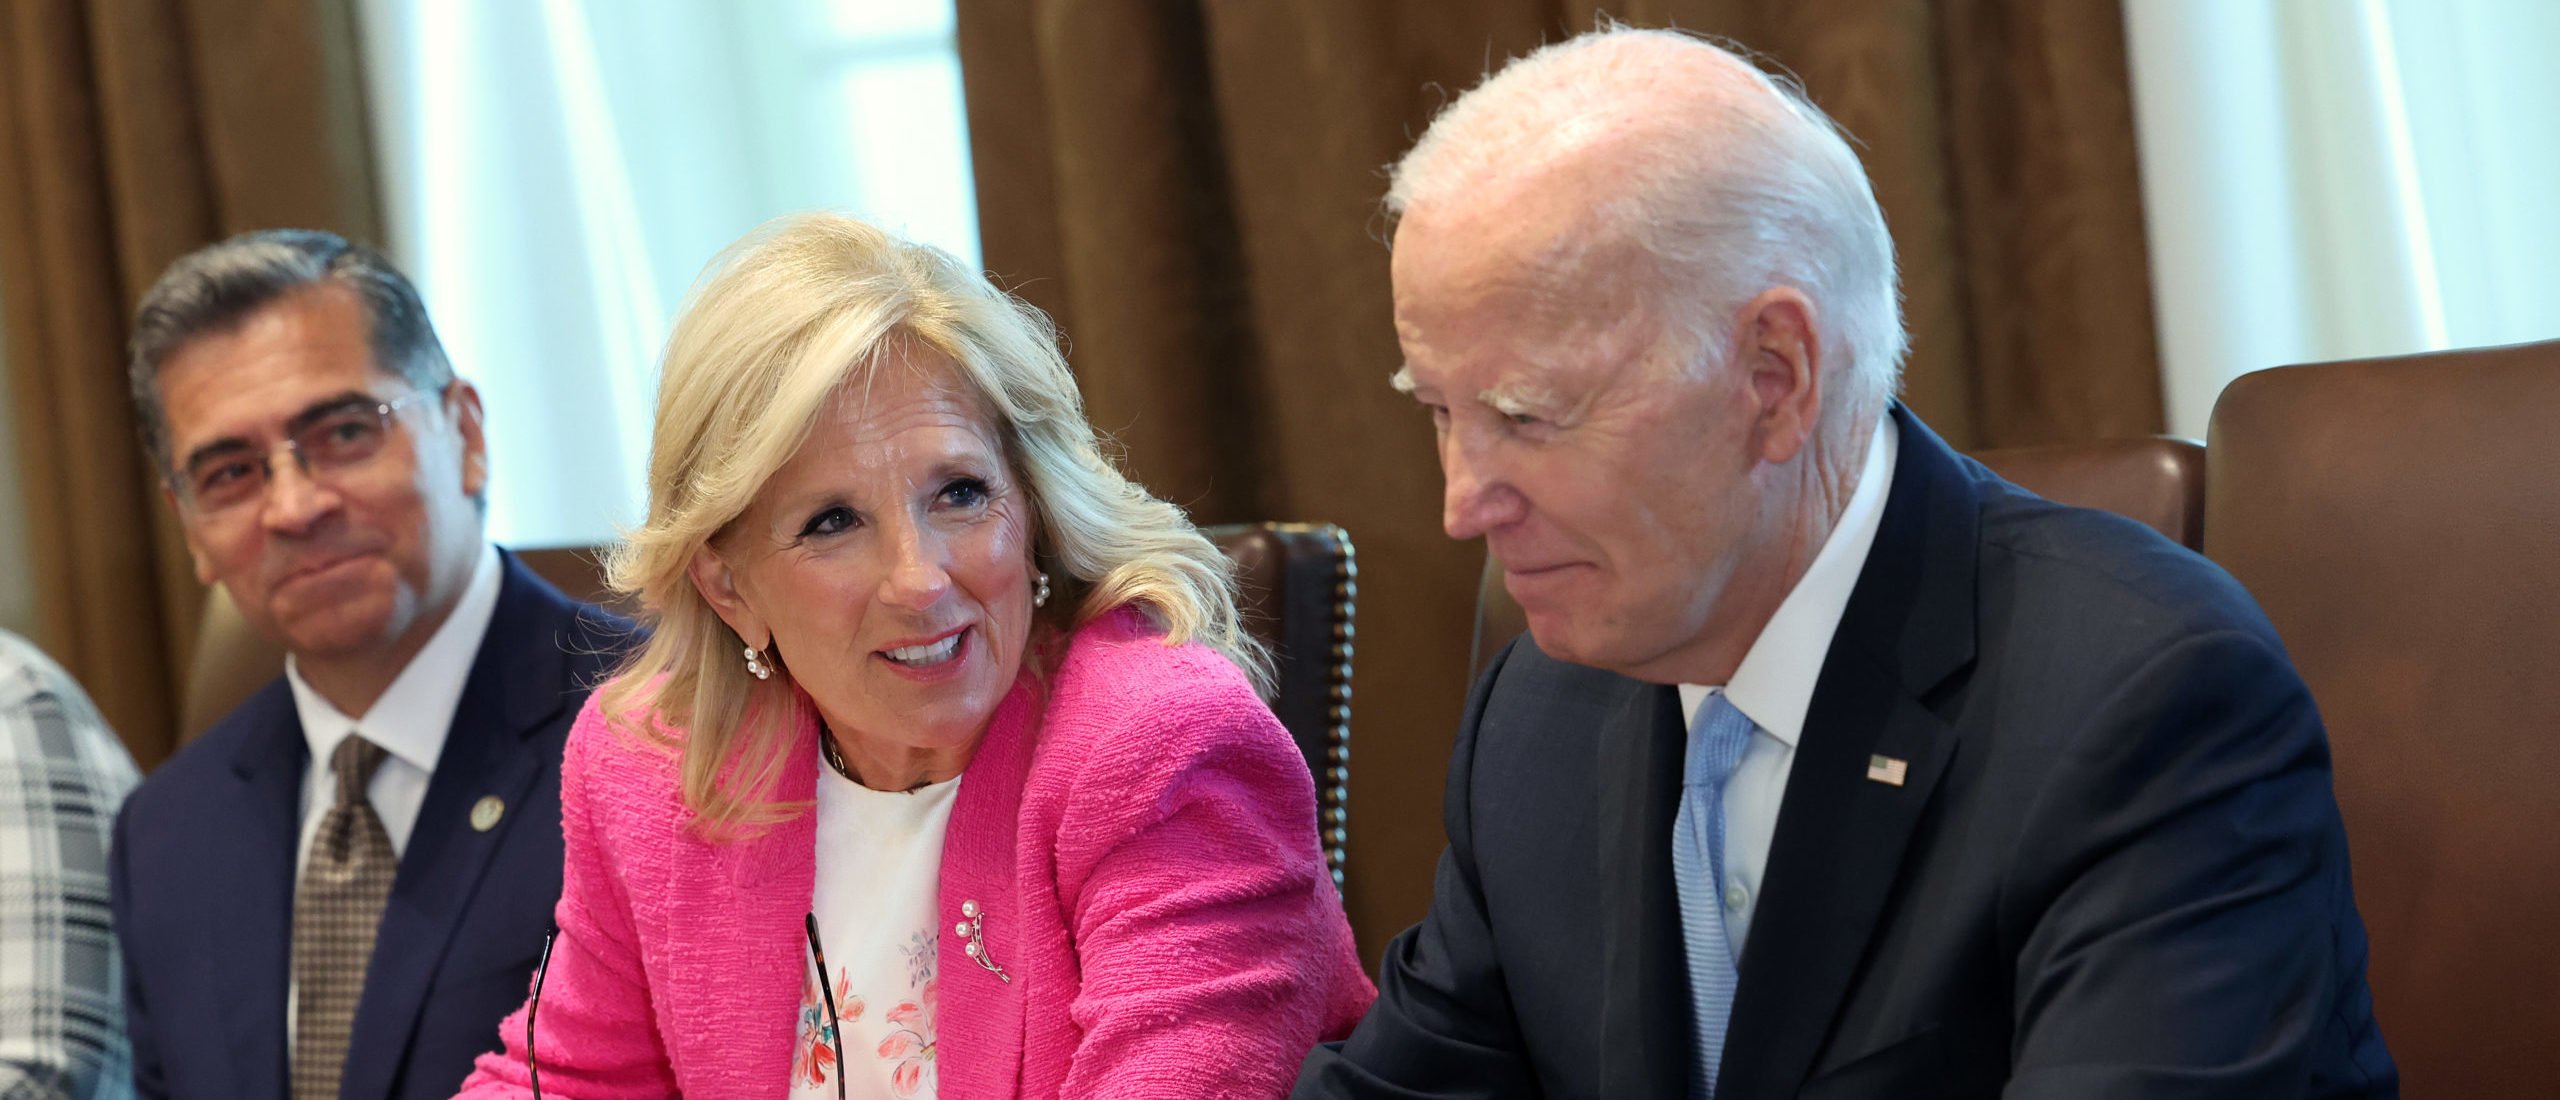 President Biden Meets With His Cancer Cabinet At The White House